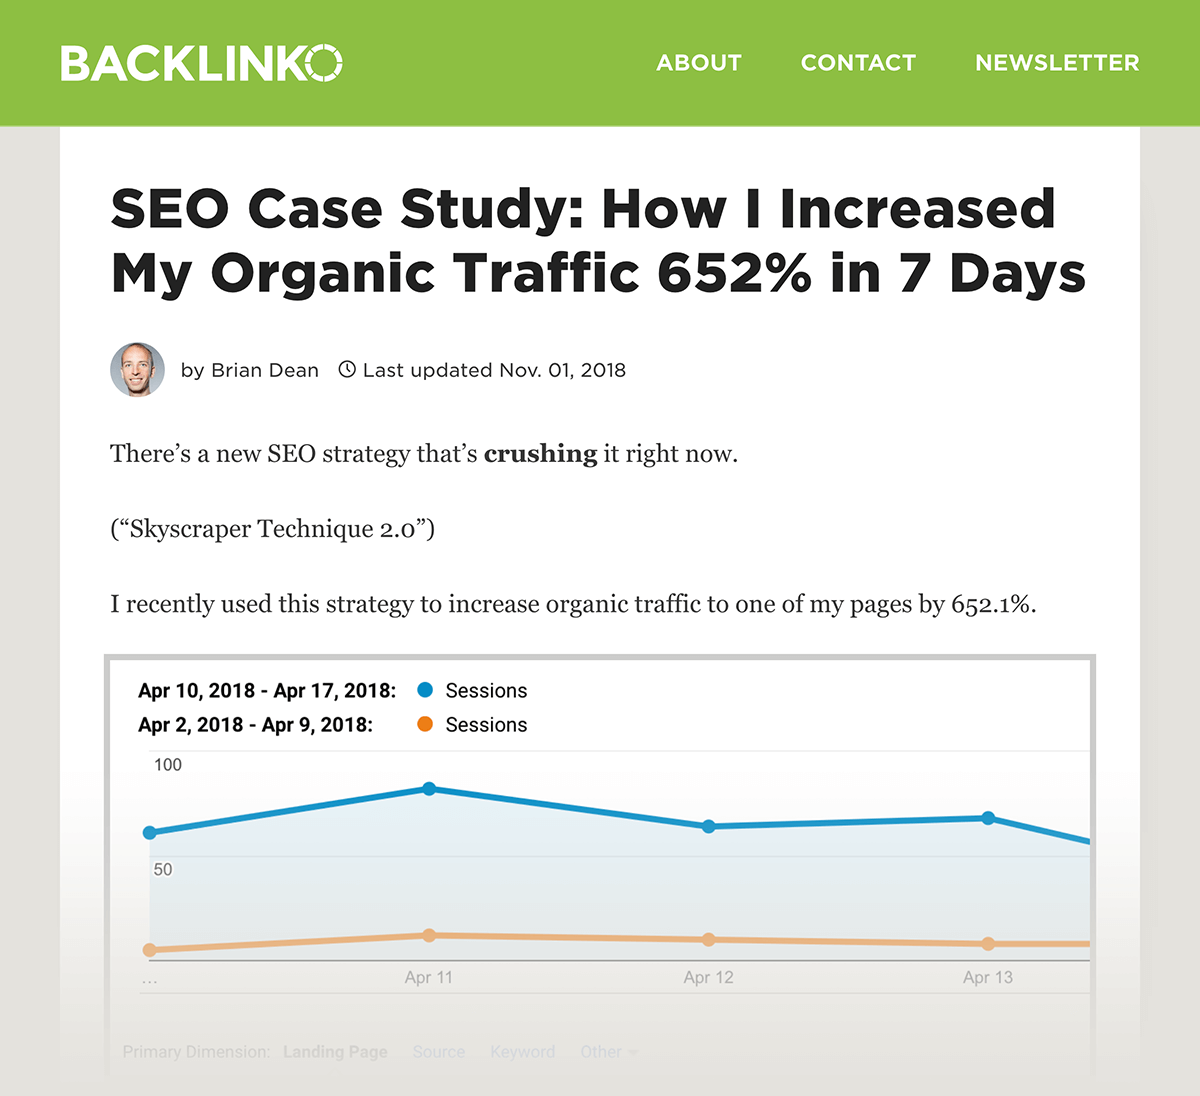 Search intent case study